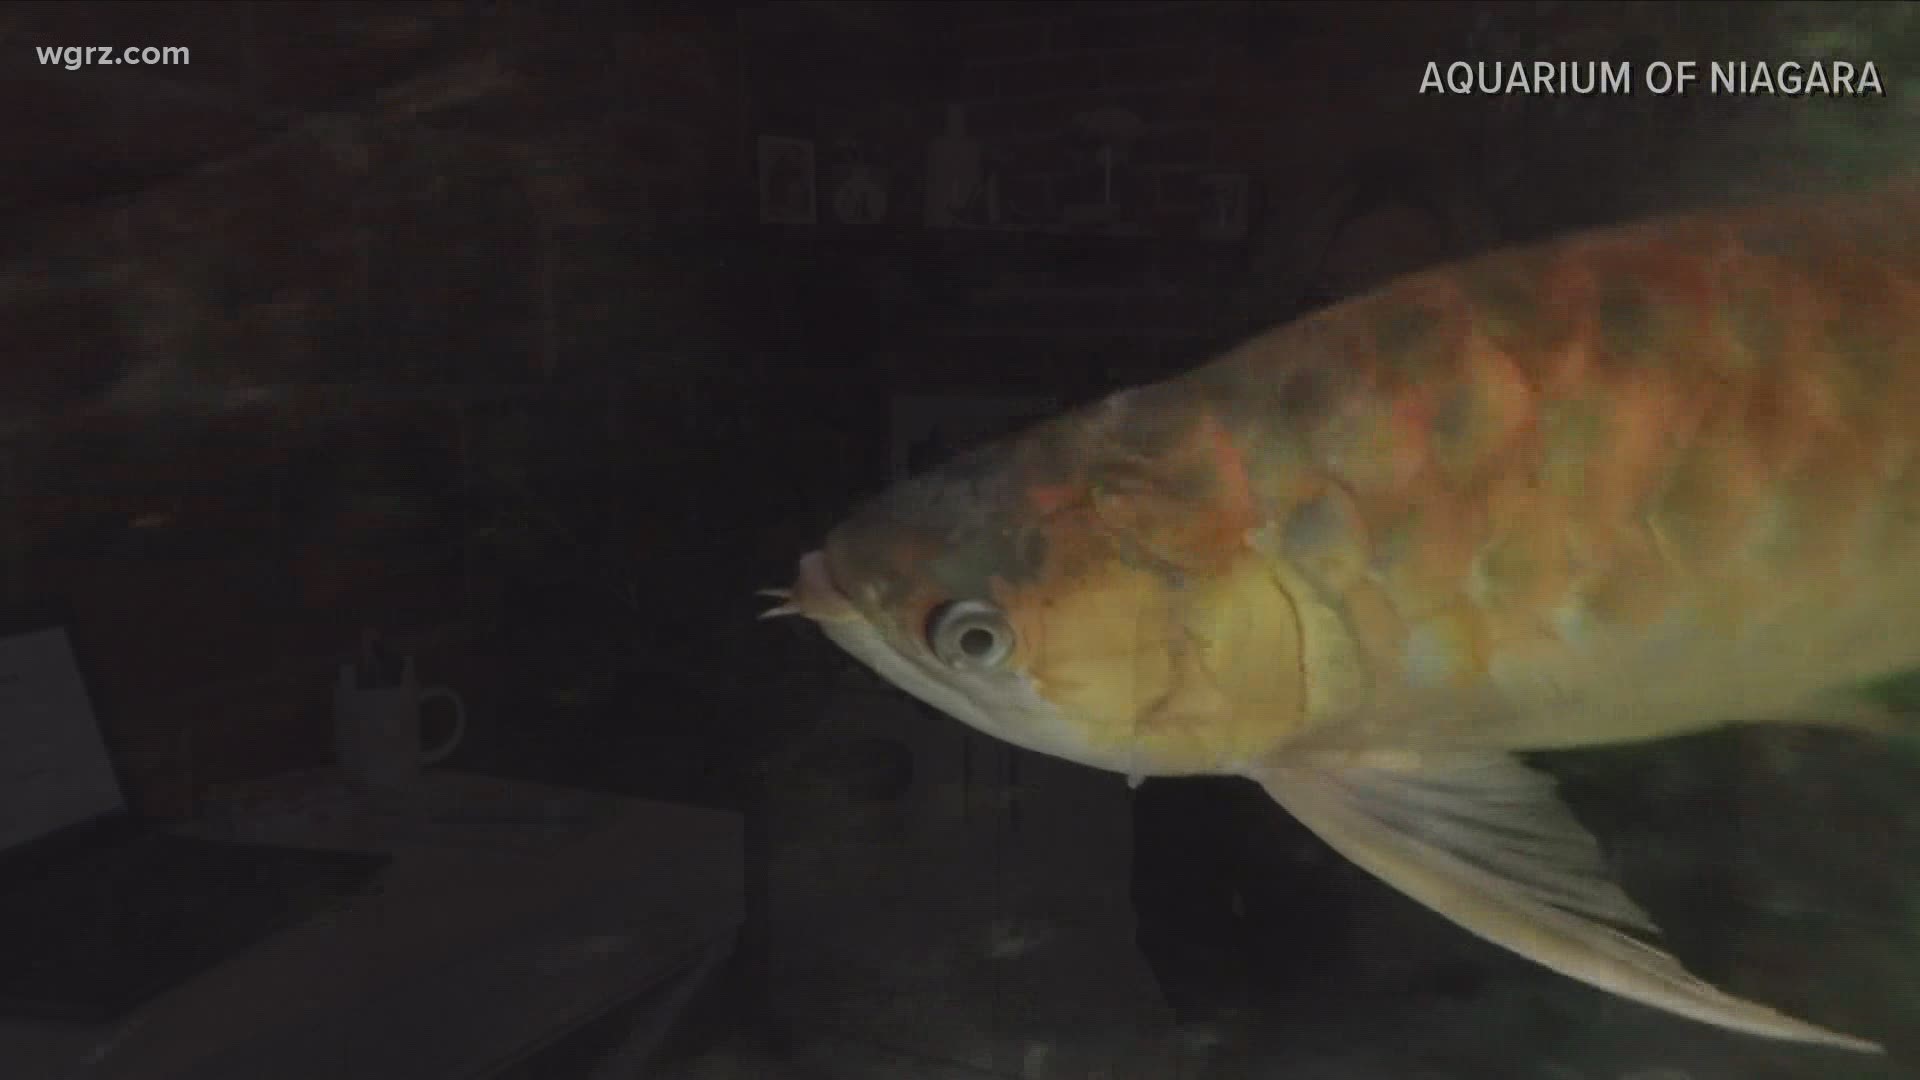 Asian arowanas are highly coveted in Chinese culture and can sell for hundreds of thousands of dollars, but it's illegal to import them into the U.S.